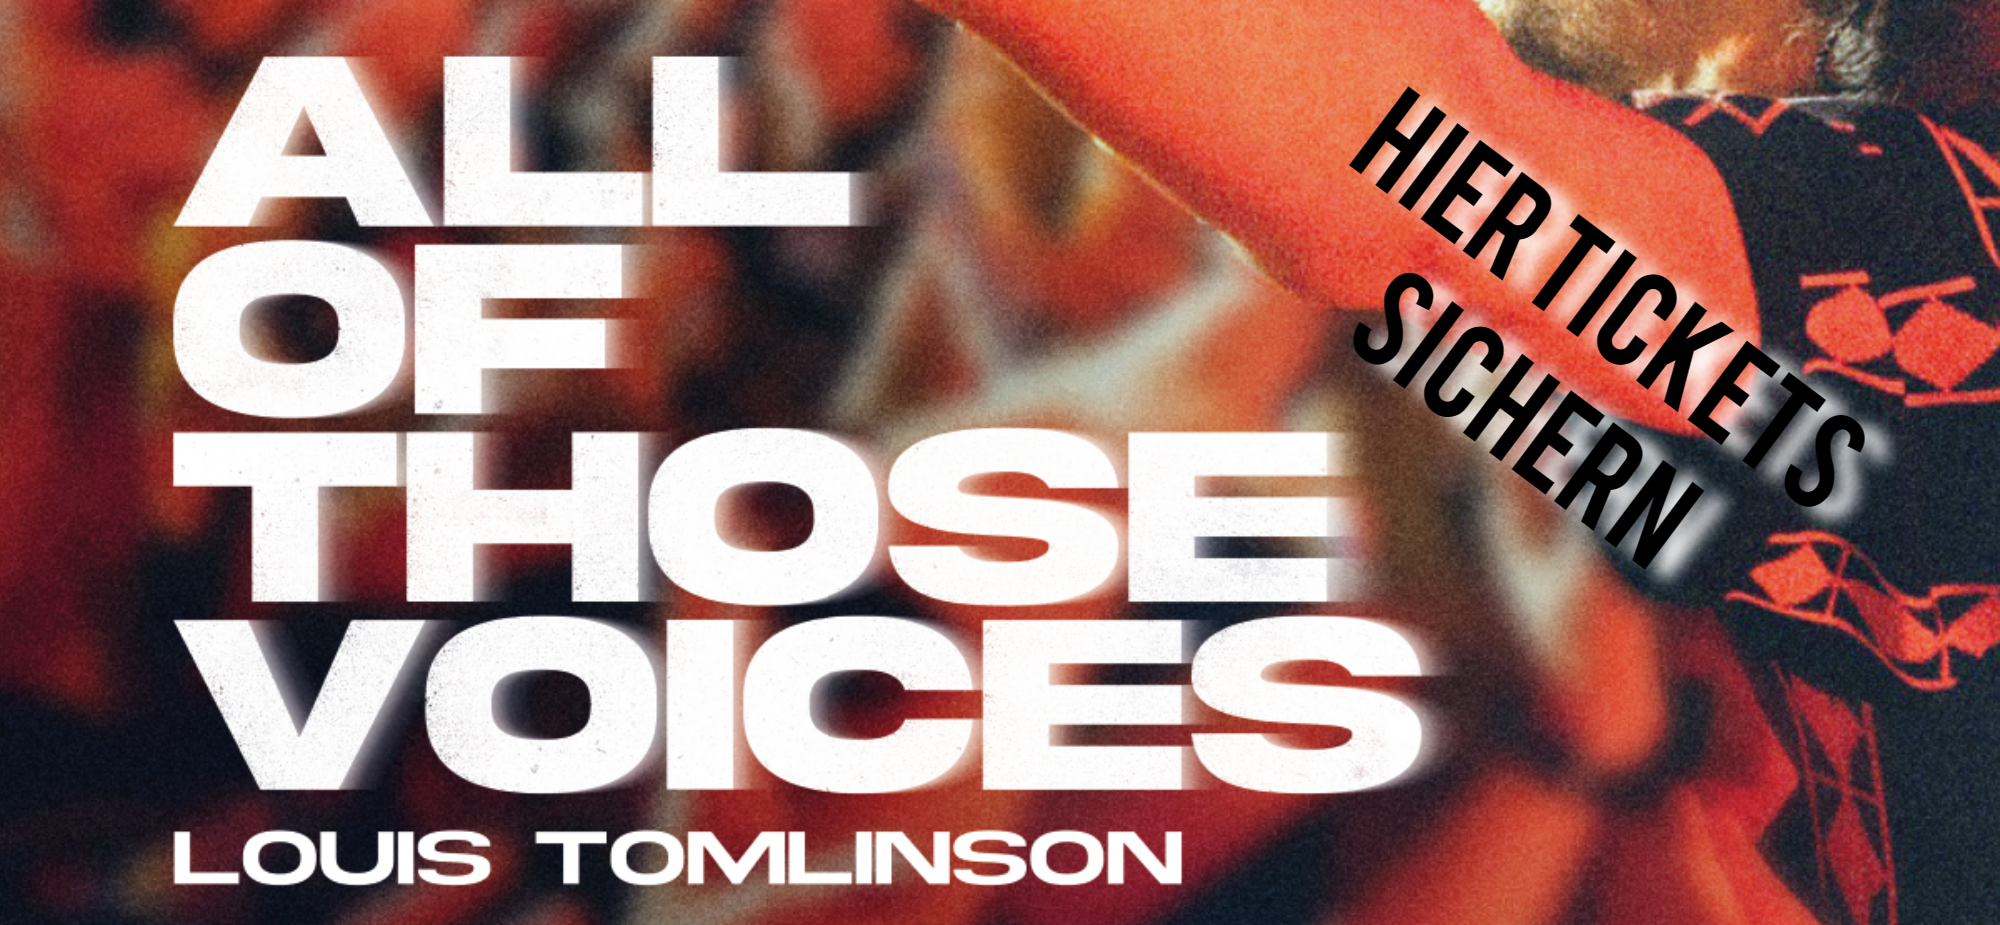 Louis Tomlinson: All of those voices